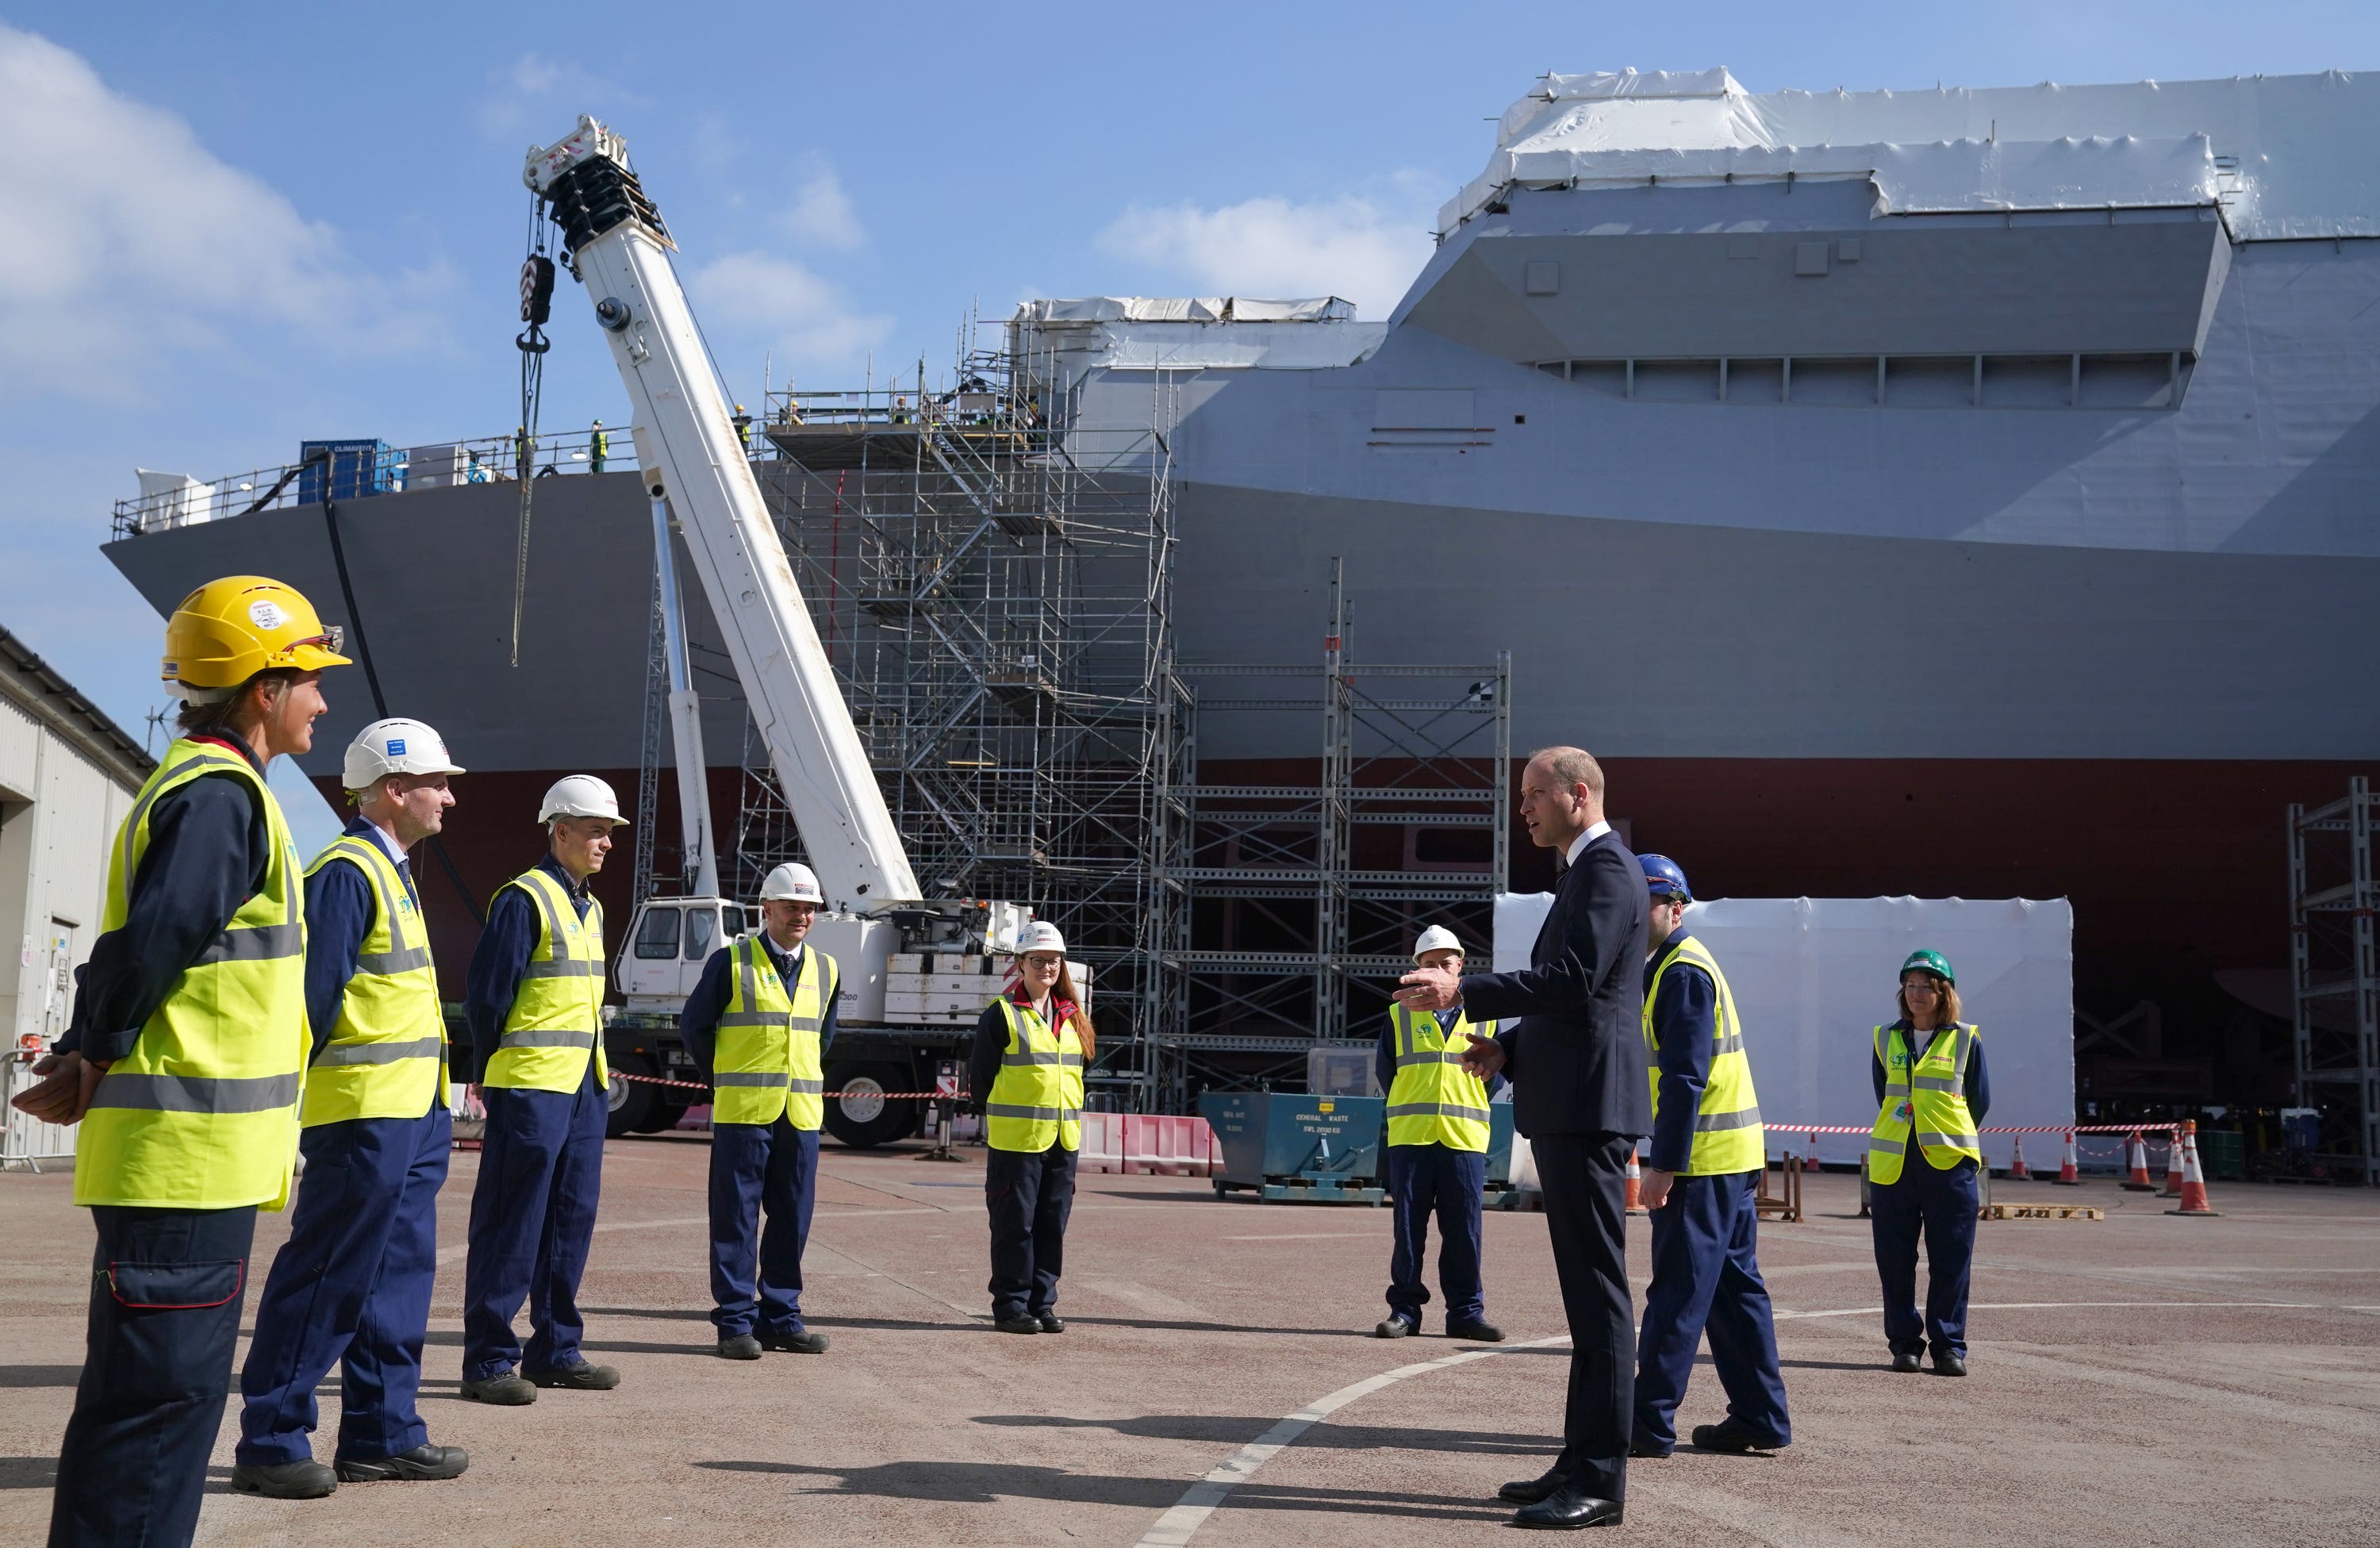 The Duke of Cambridge met staff at the BAE Systems shipyard in Govan in the shadow of HMS Glasgow.